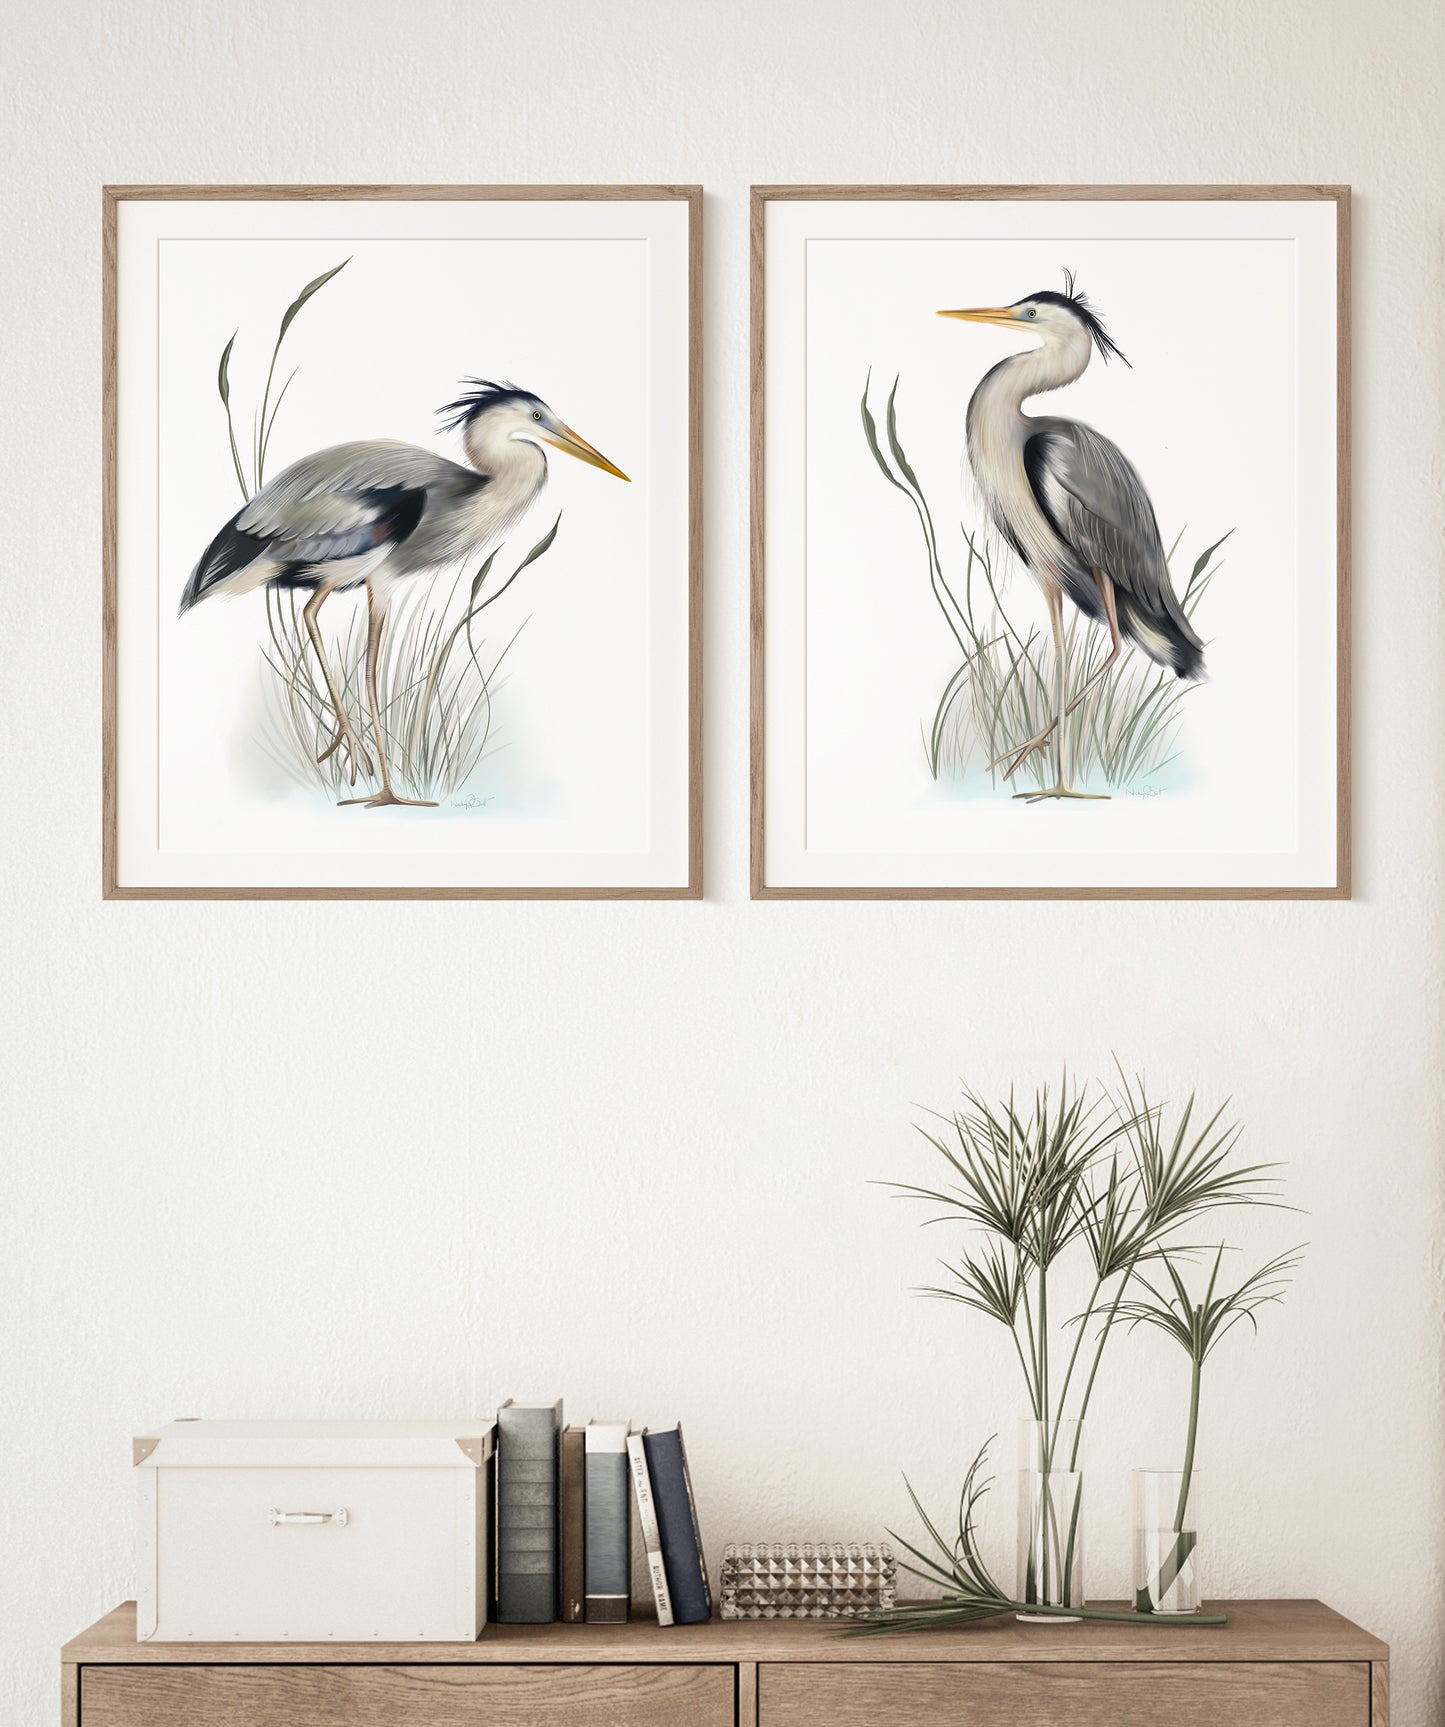 Set of 2 Great Blue Heron Birds in tall grasses art illustration prints on white backgrounds in wood frames hung on a white wall. The frames sit above a credenza in a living room - Studio Q - Art by Nicky Quartermaine Scott